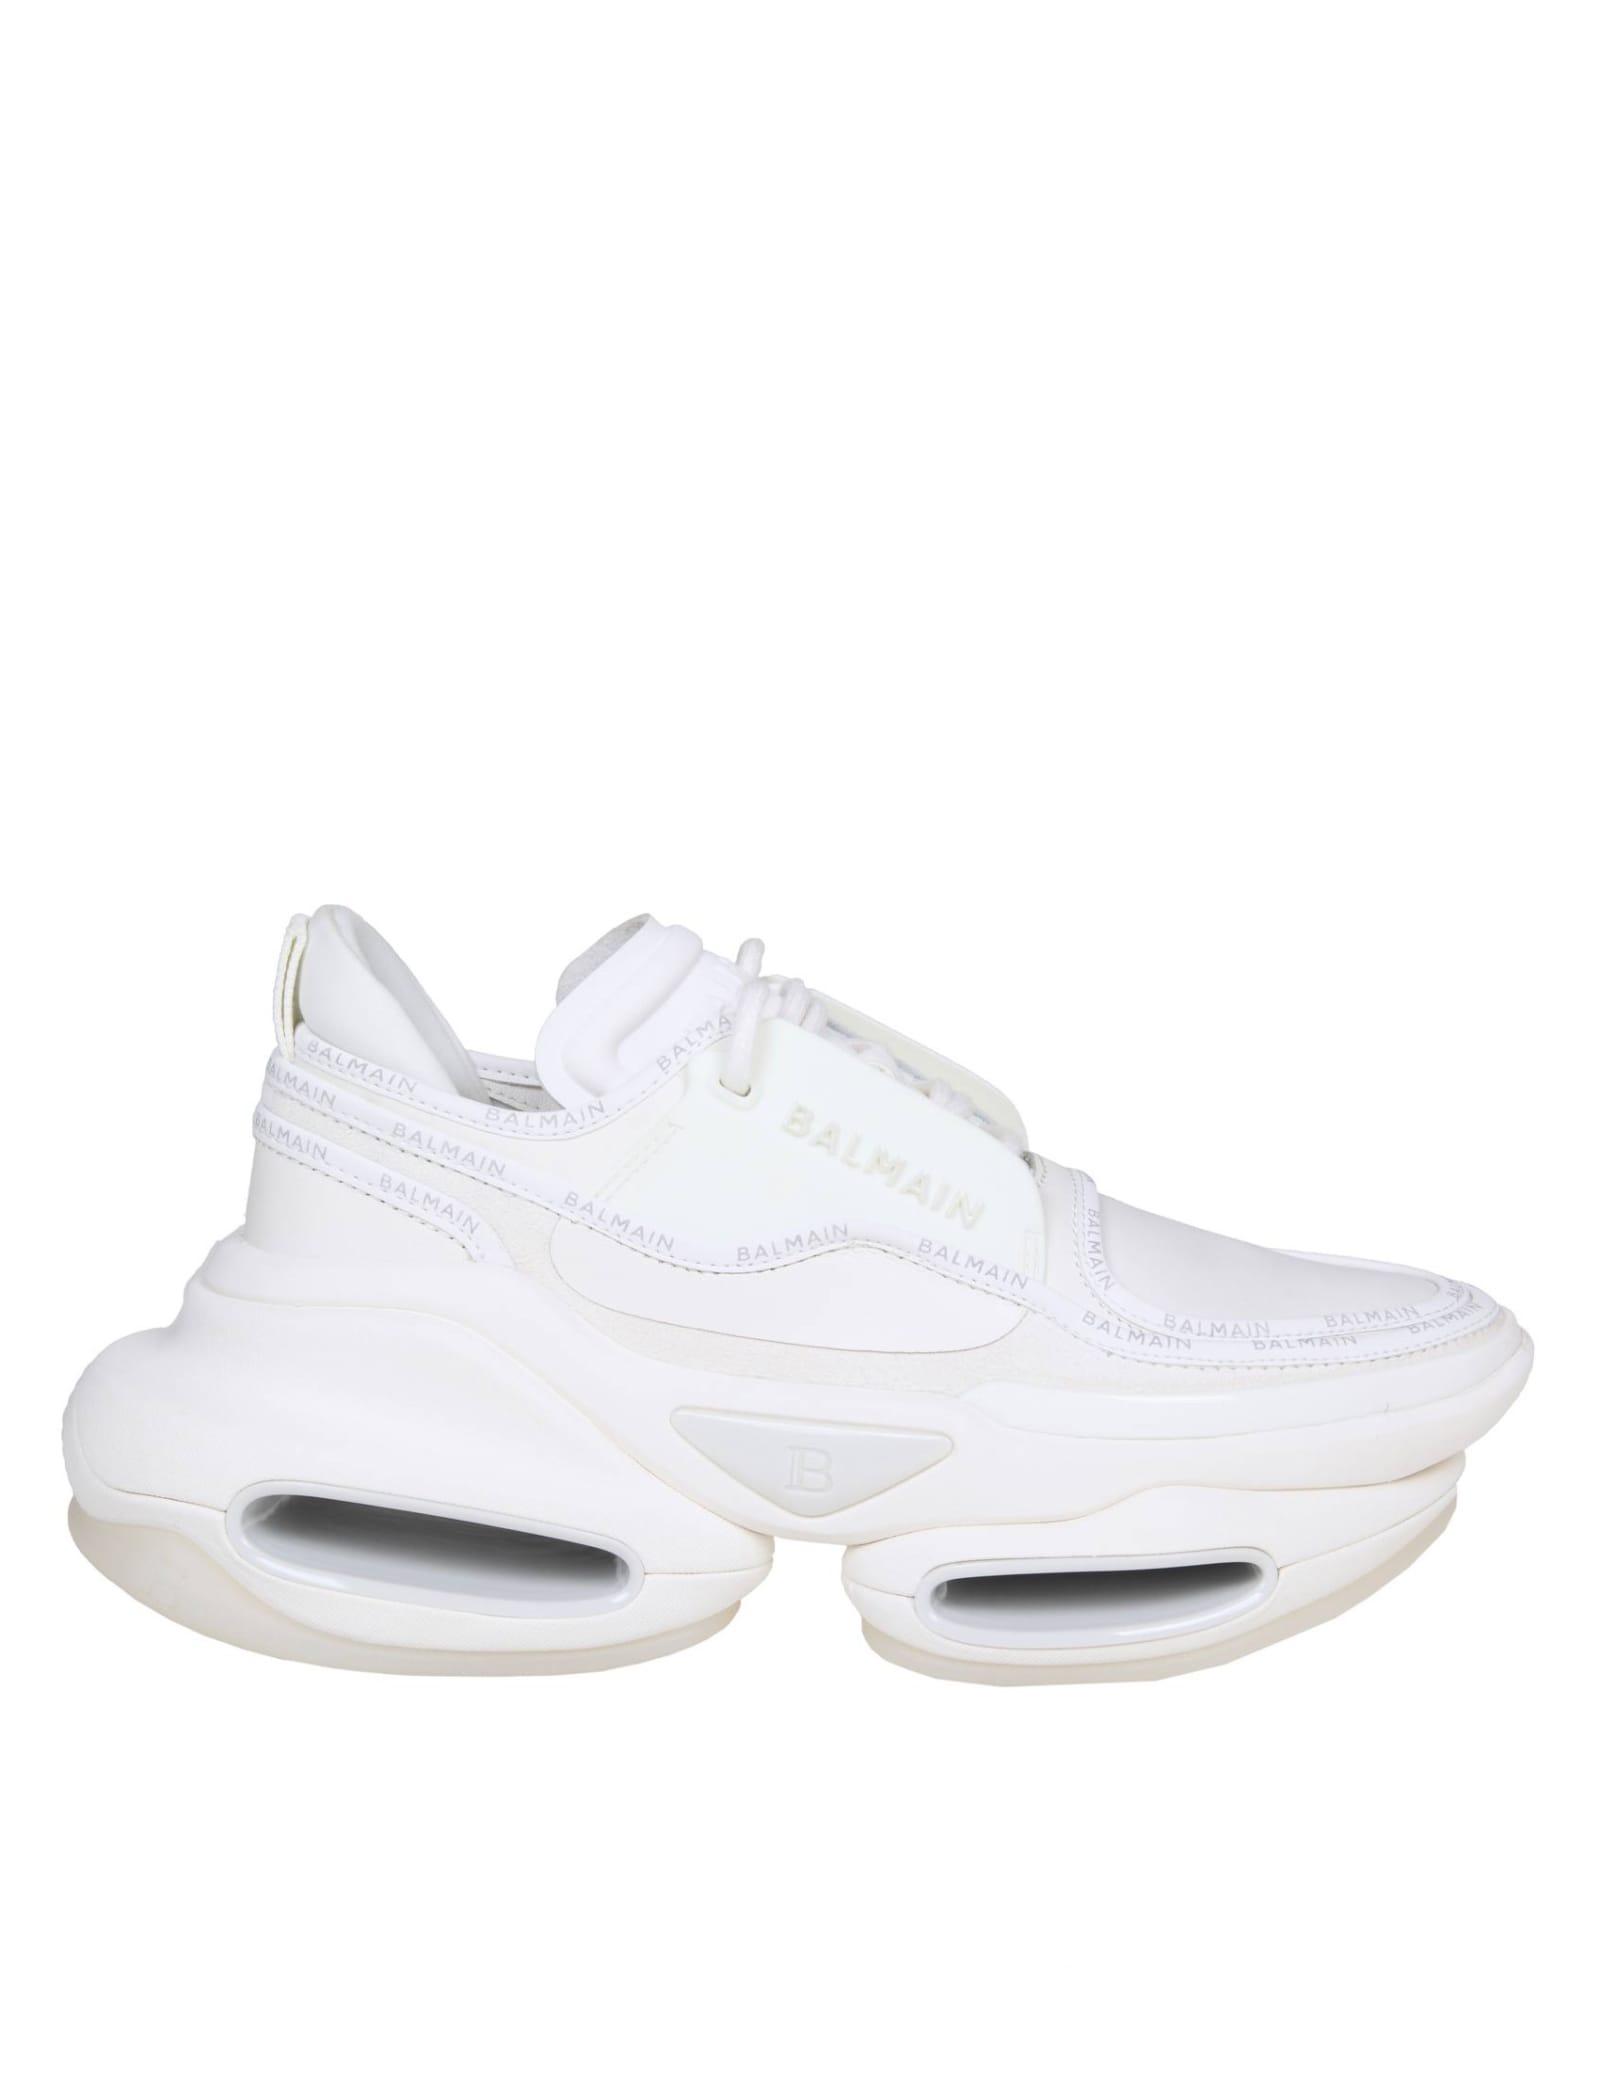 Balmain Sneakers B-bold In Leather And Suede Color in White | Lyst